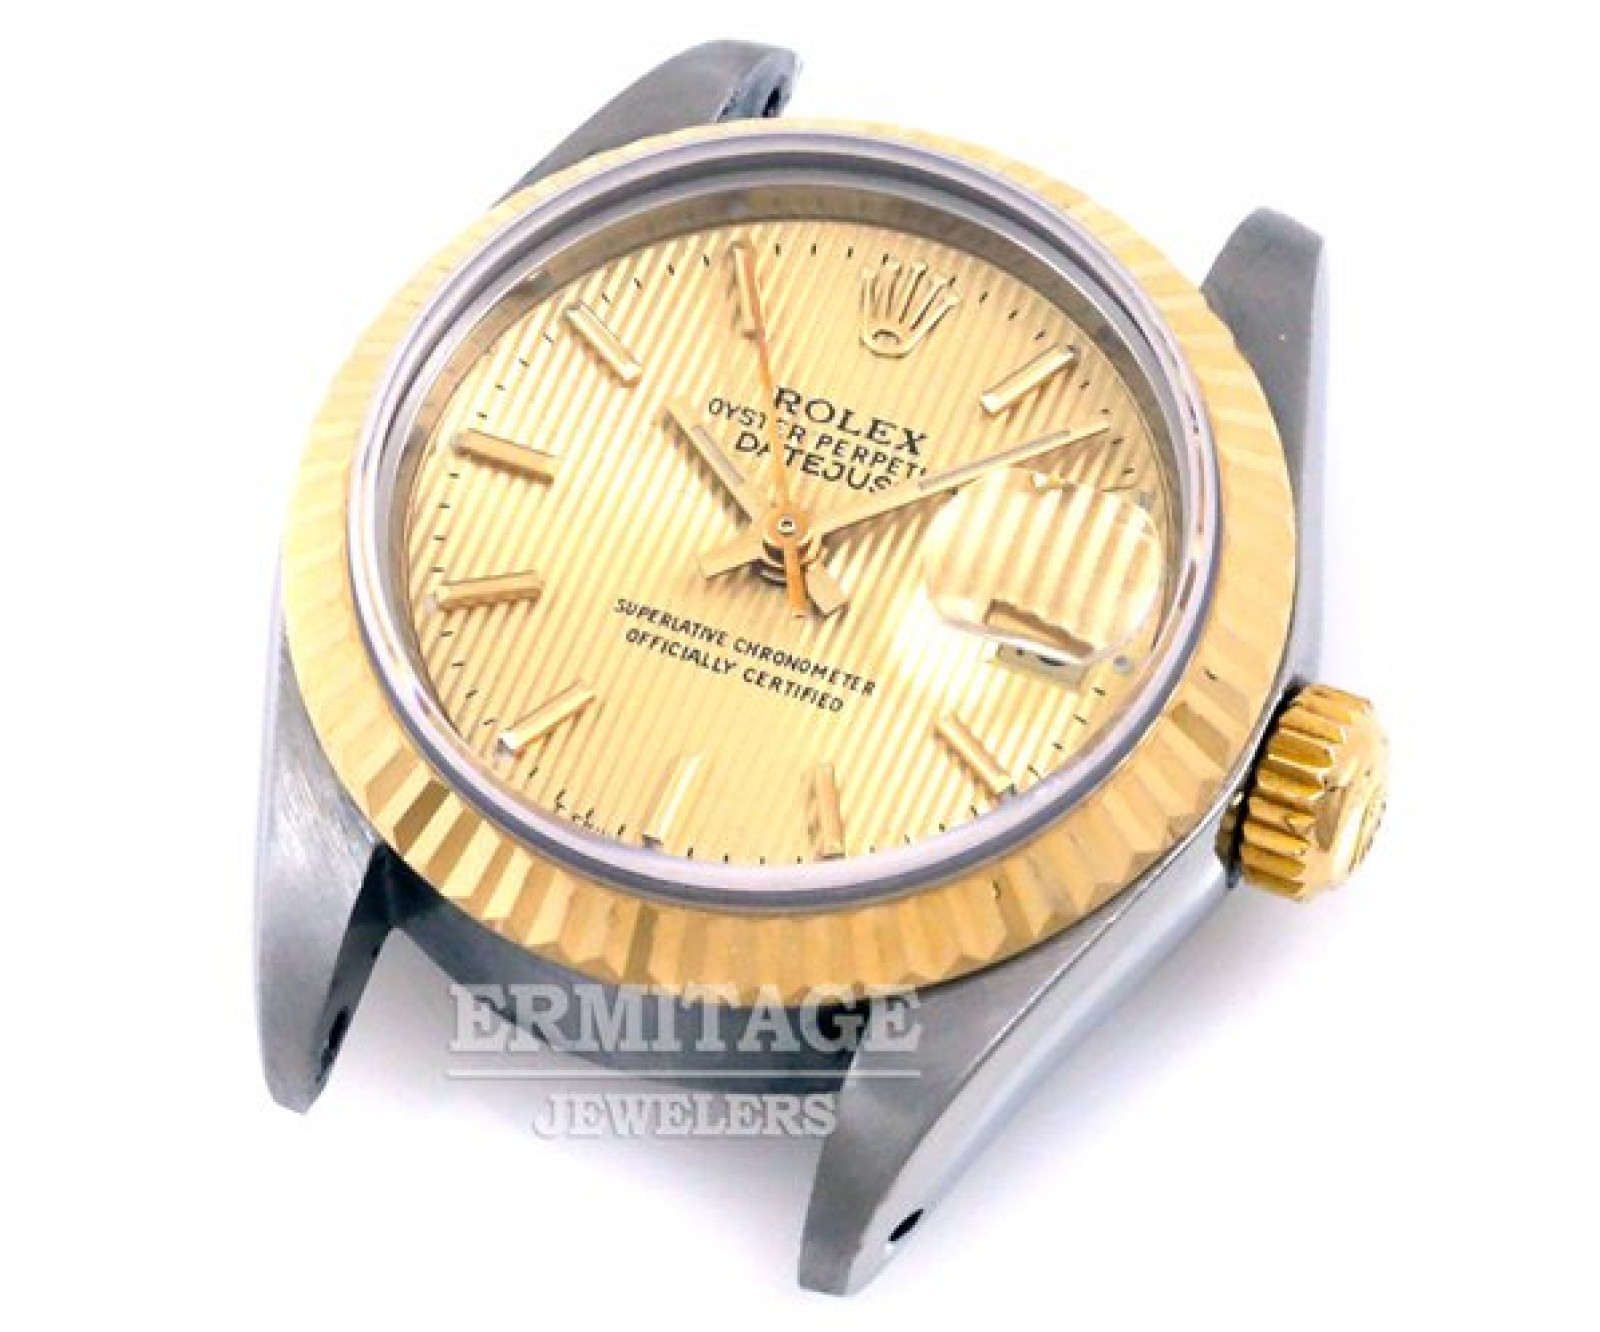 Tapestry Champagne Dial Rolex Datejust 69173